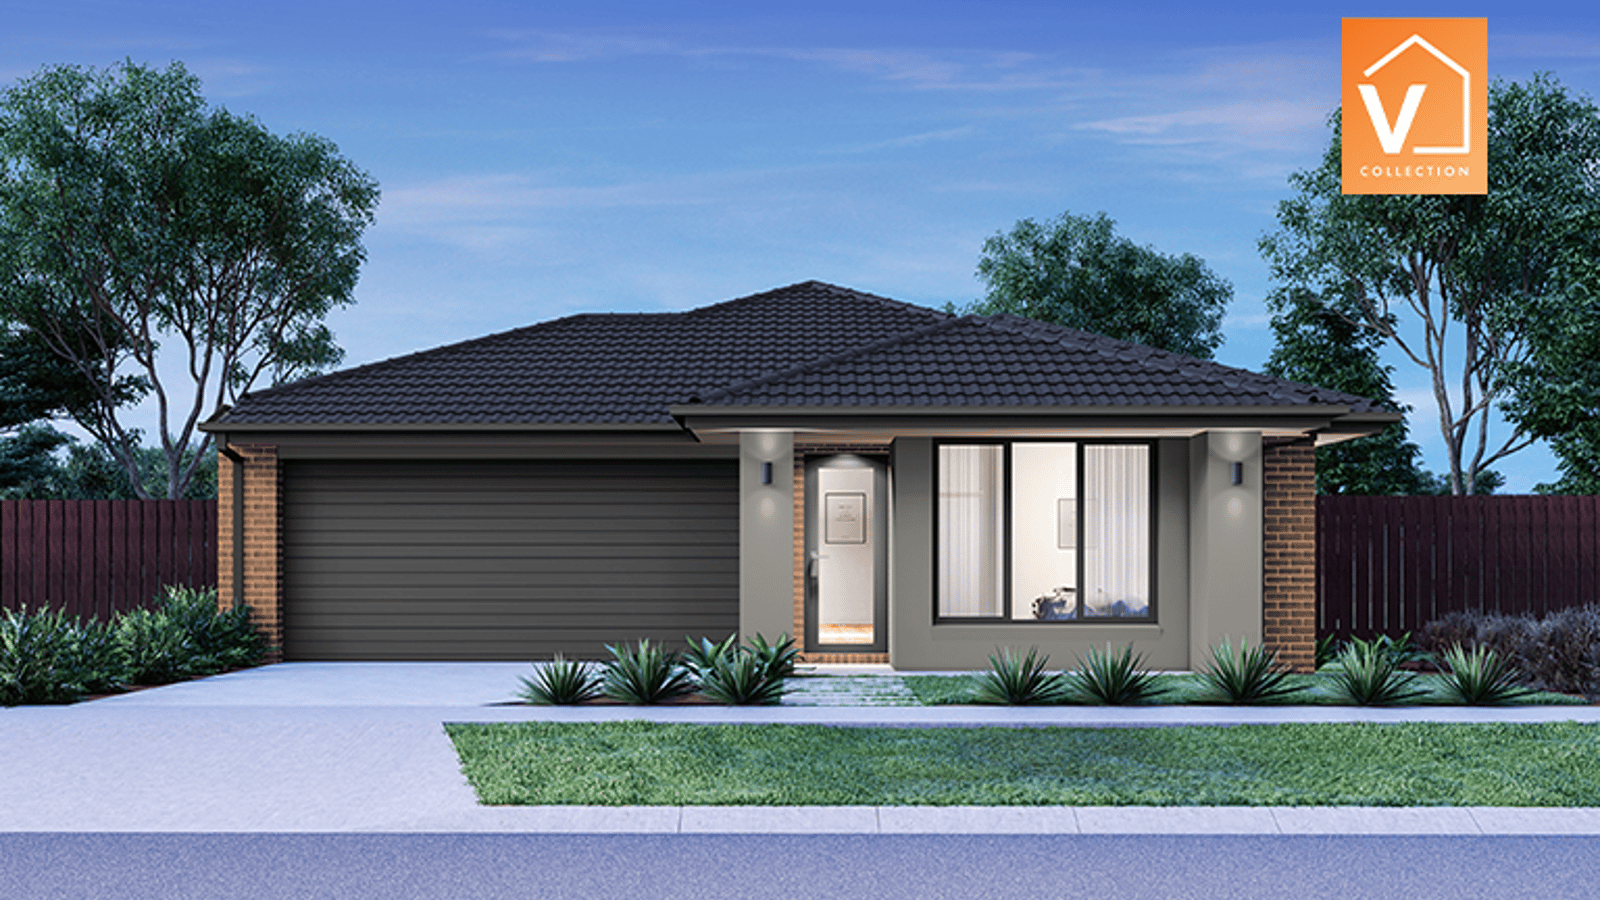 Photo of Lot 2408 Celevan Street - Smiths Lane, Clyde North VIC 3978 AUS